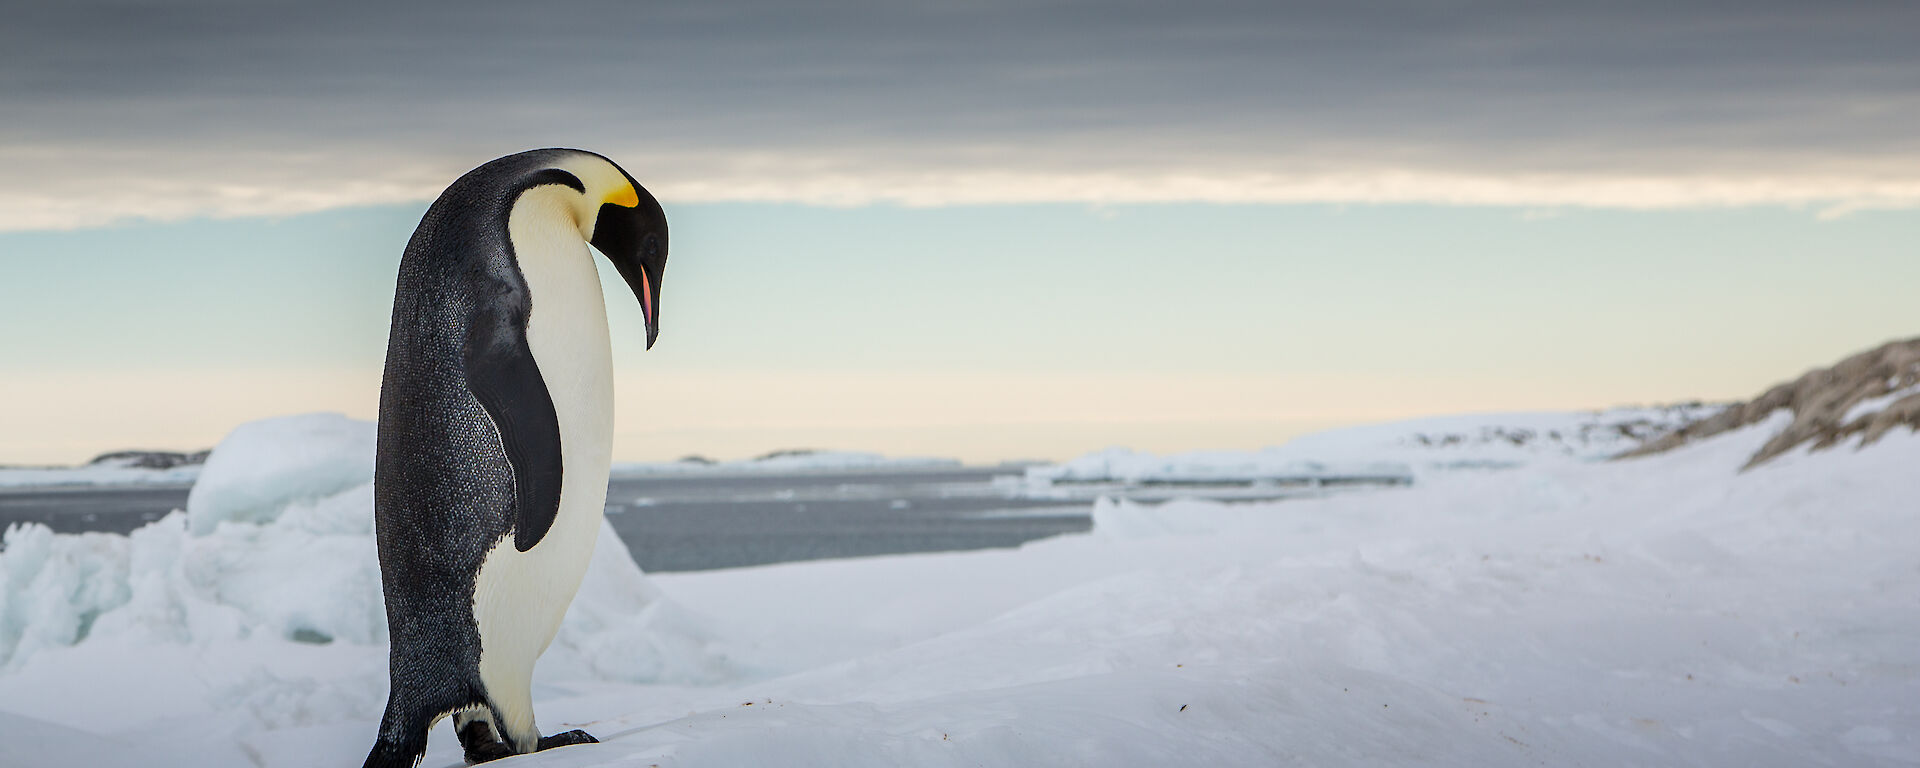 Emperor penguin standig on ice with water in background